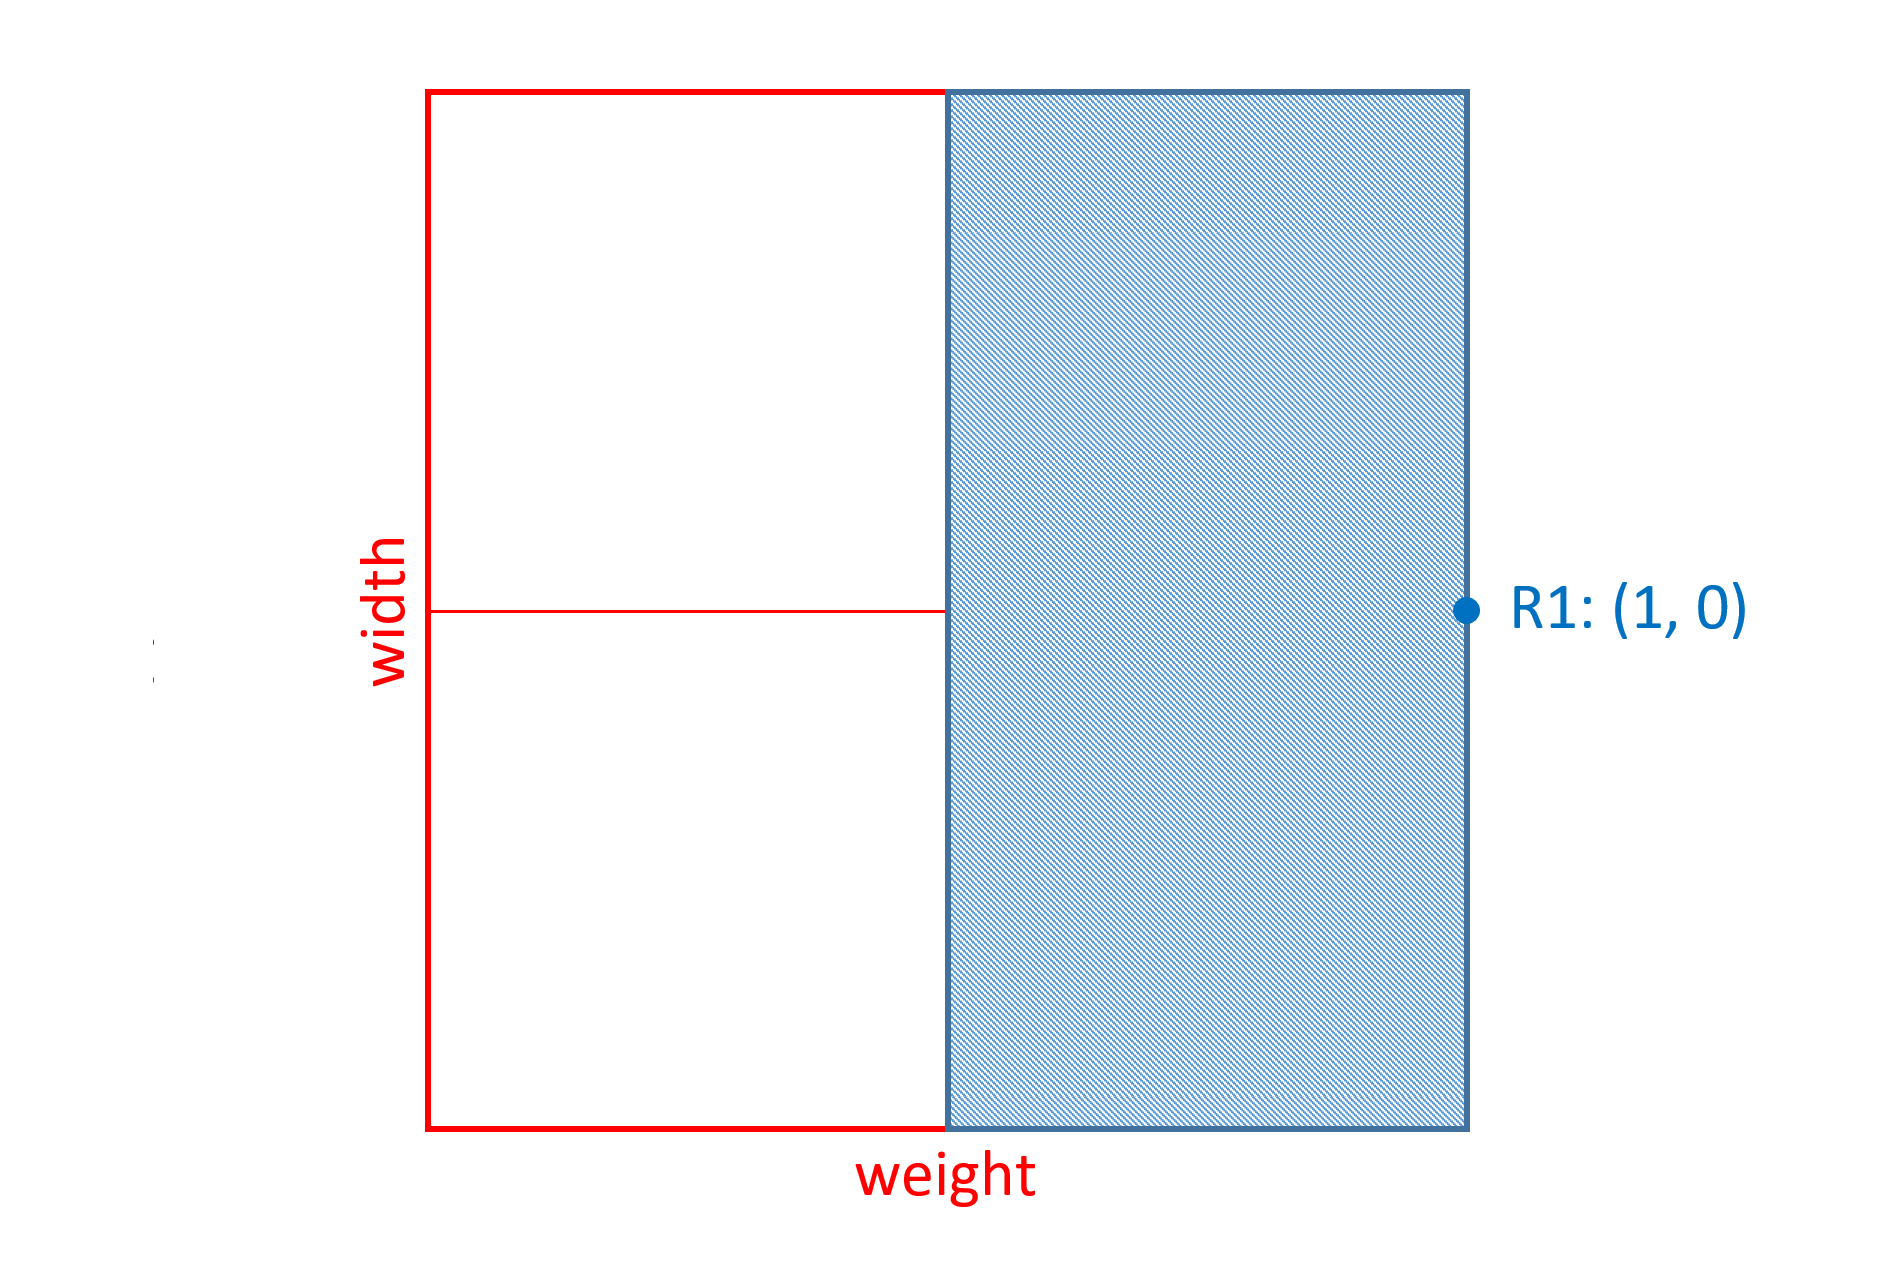 A Cartesian space with a region covering the right two quadrants